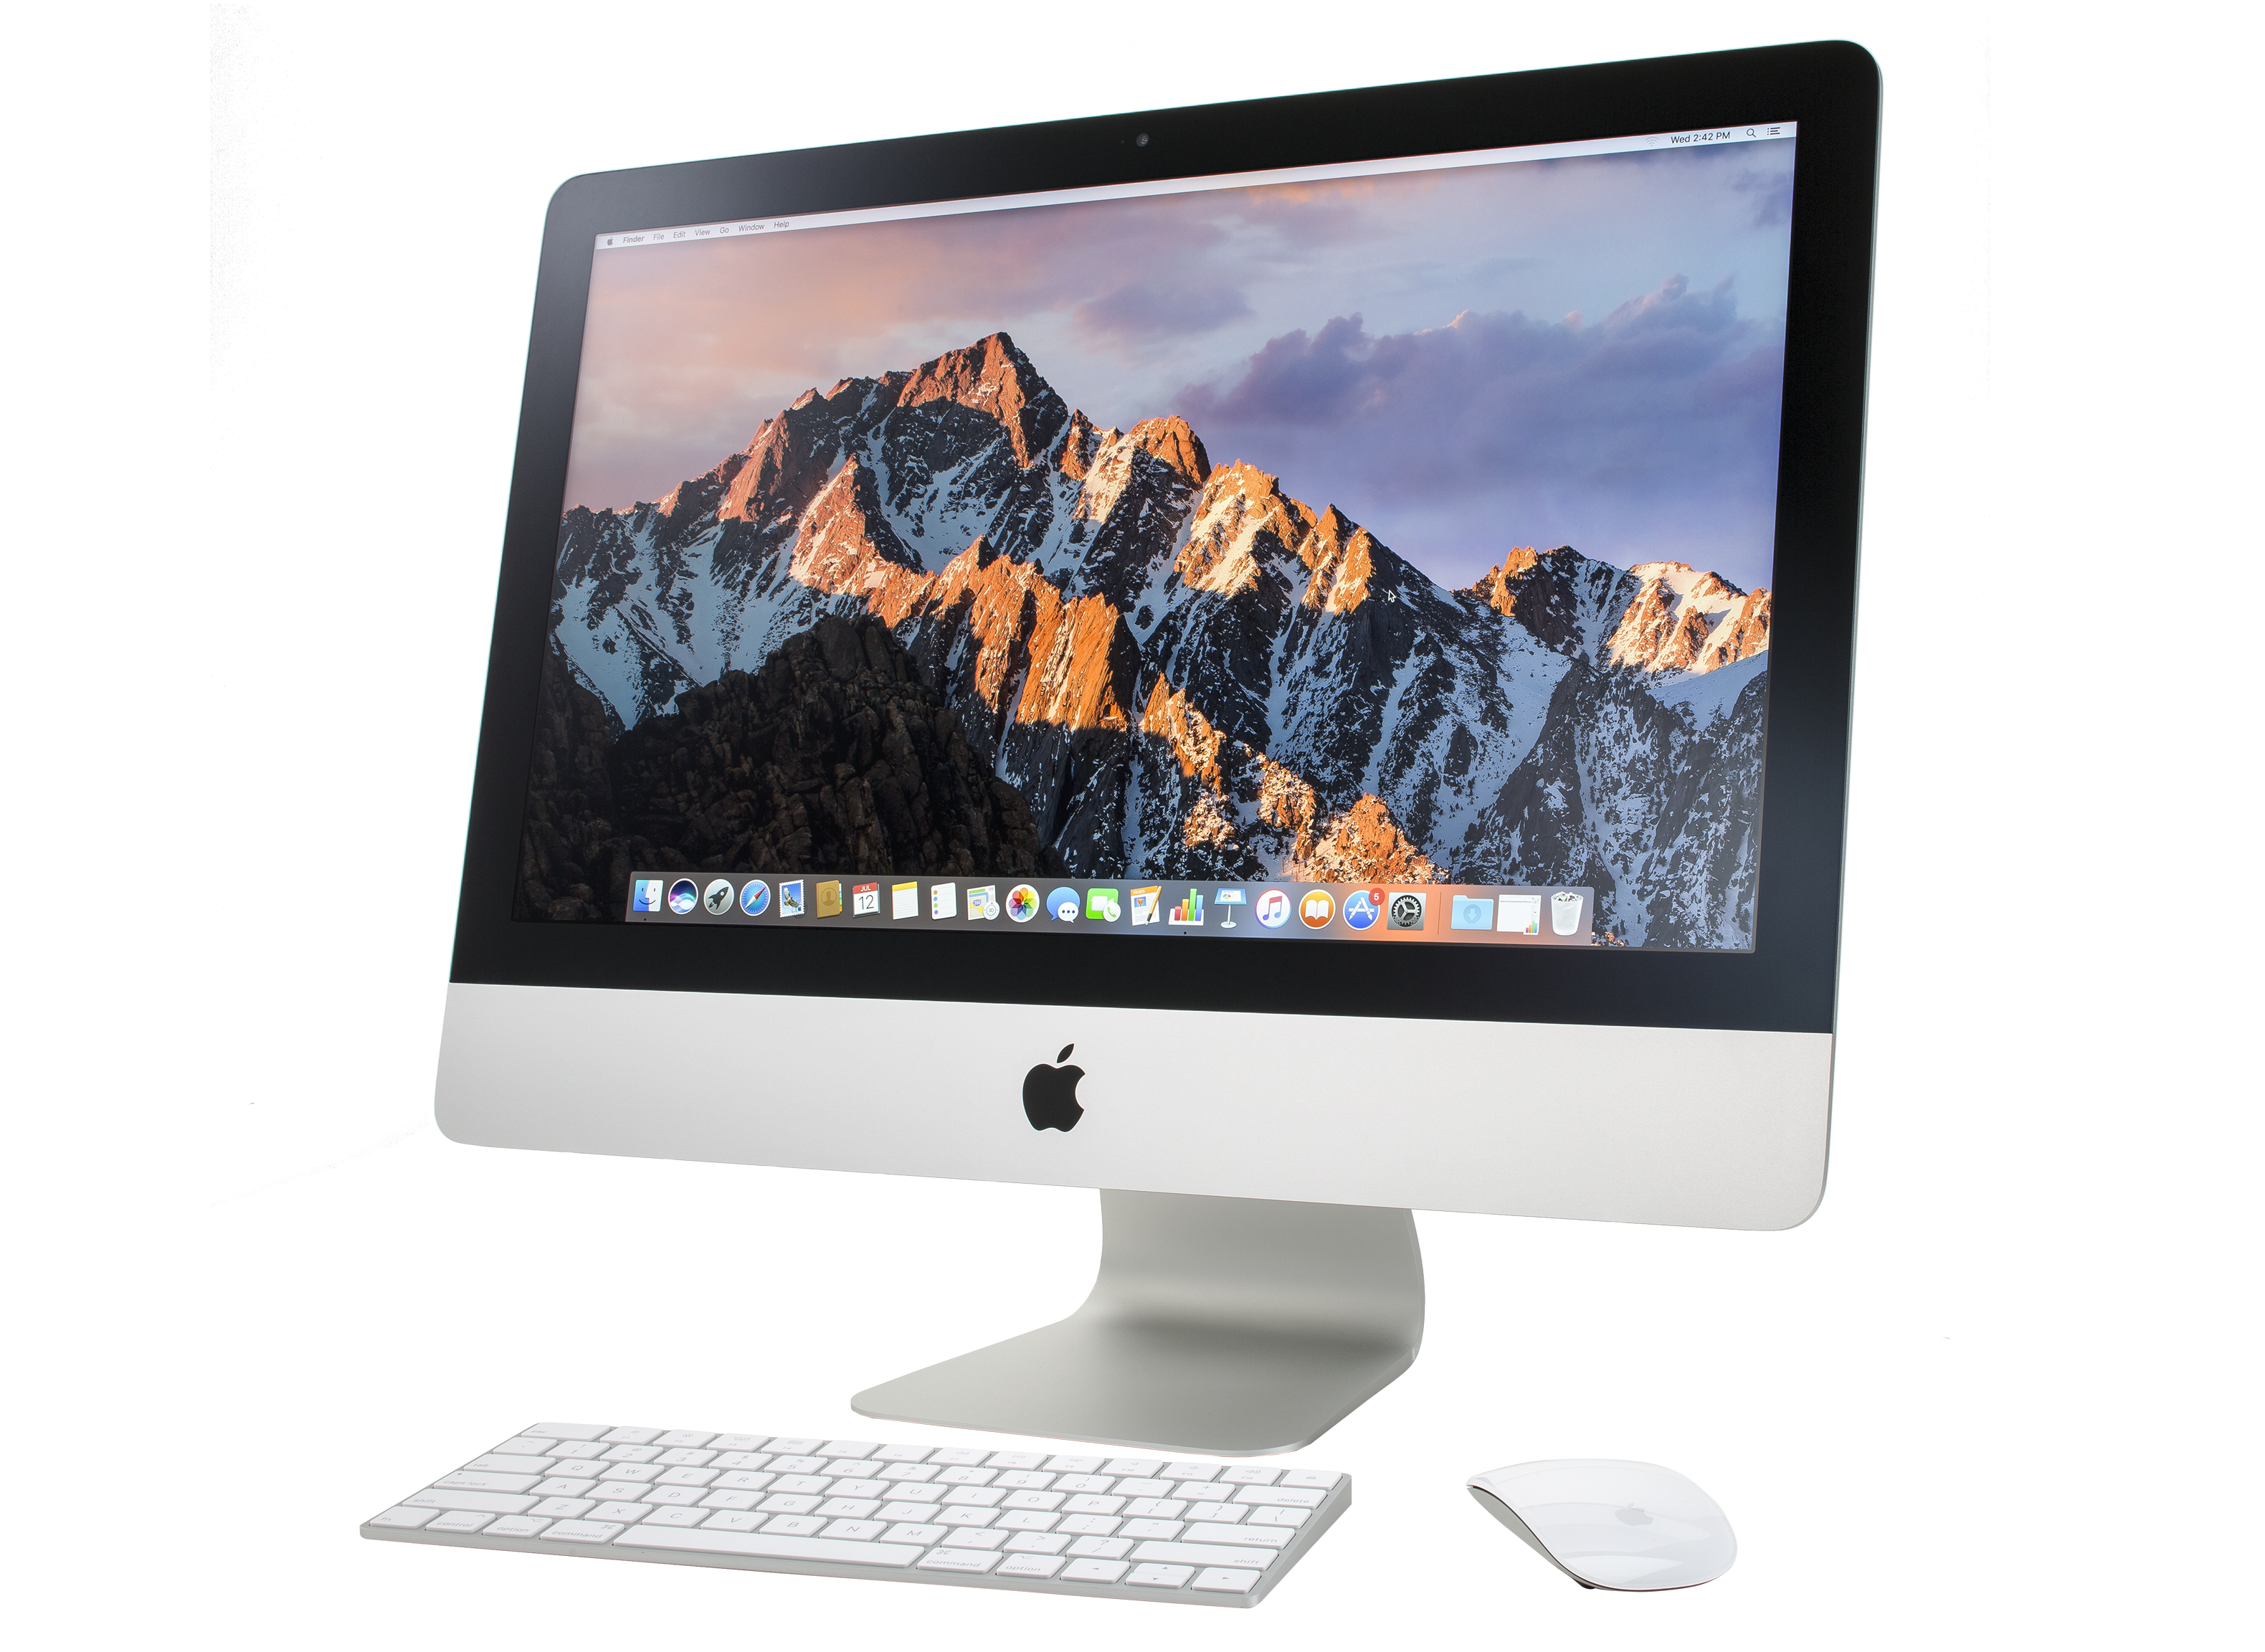 Apple 21.5-inch iMac MMQA2LL/A Computer Review - Consumer Reports